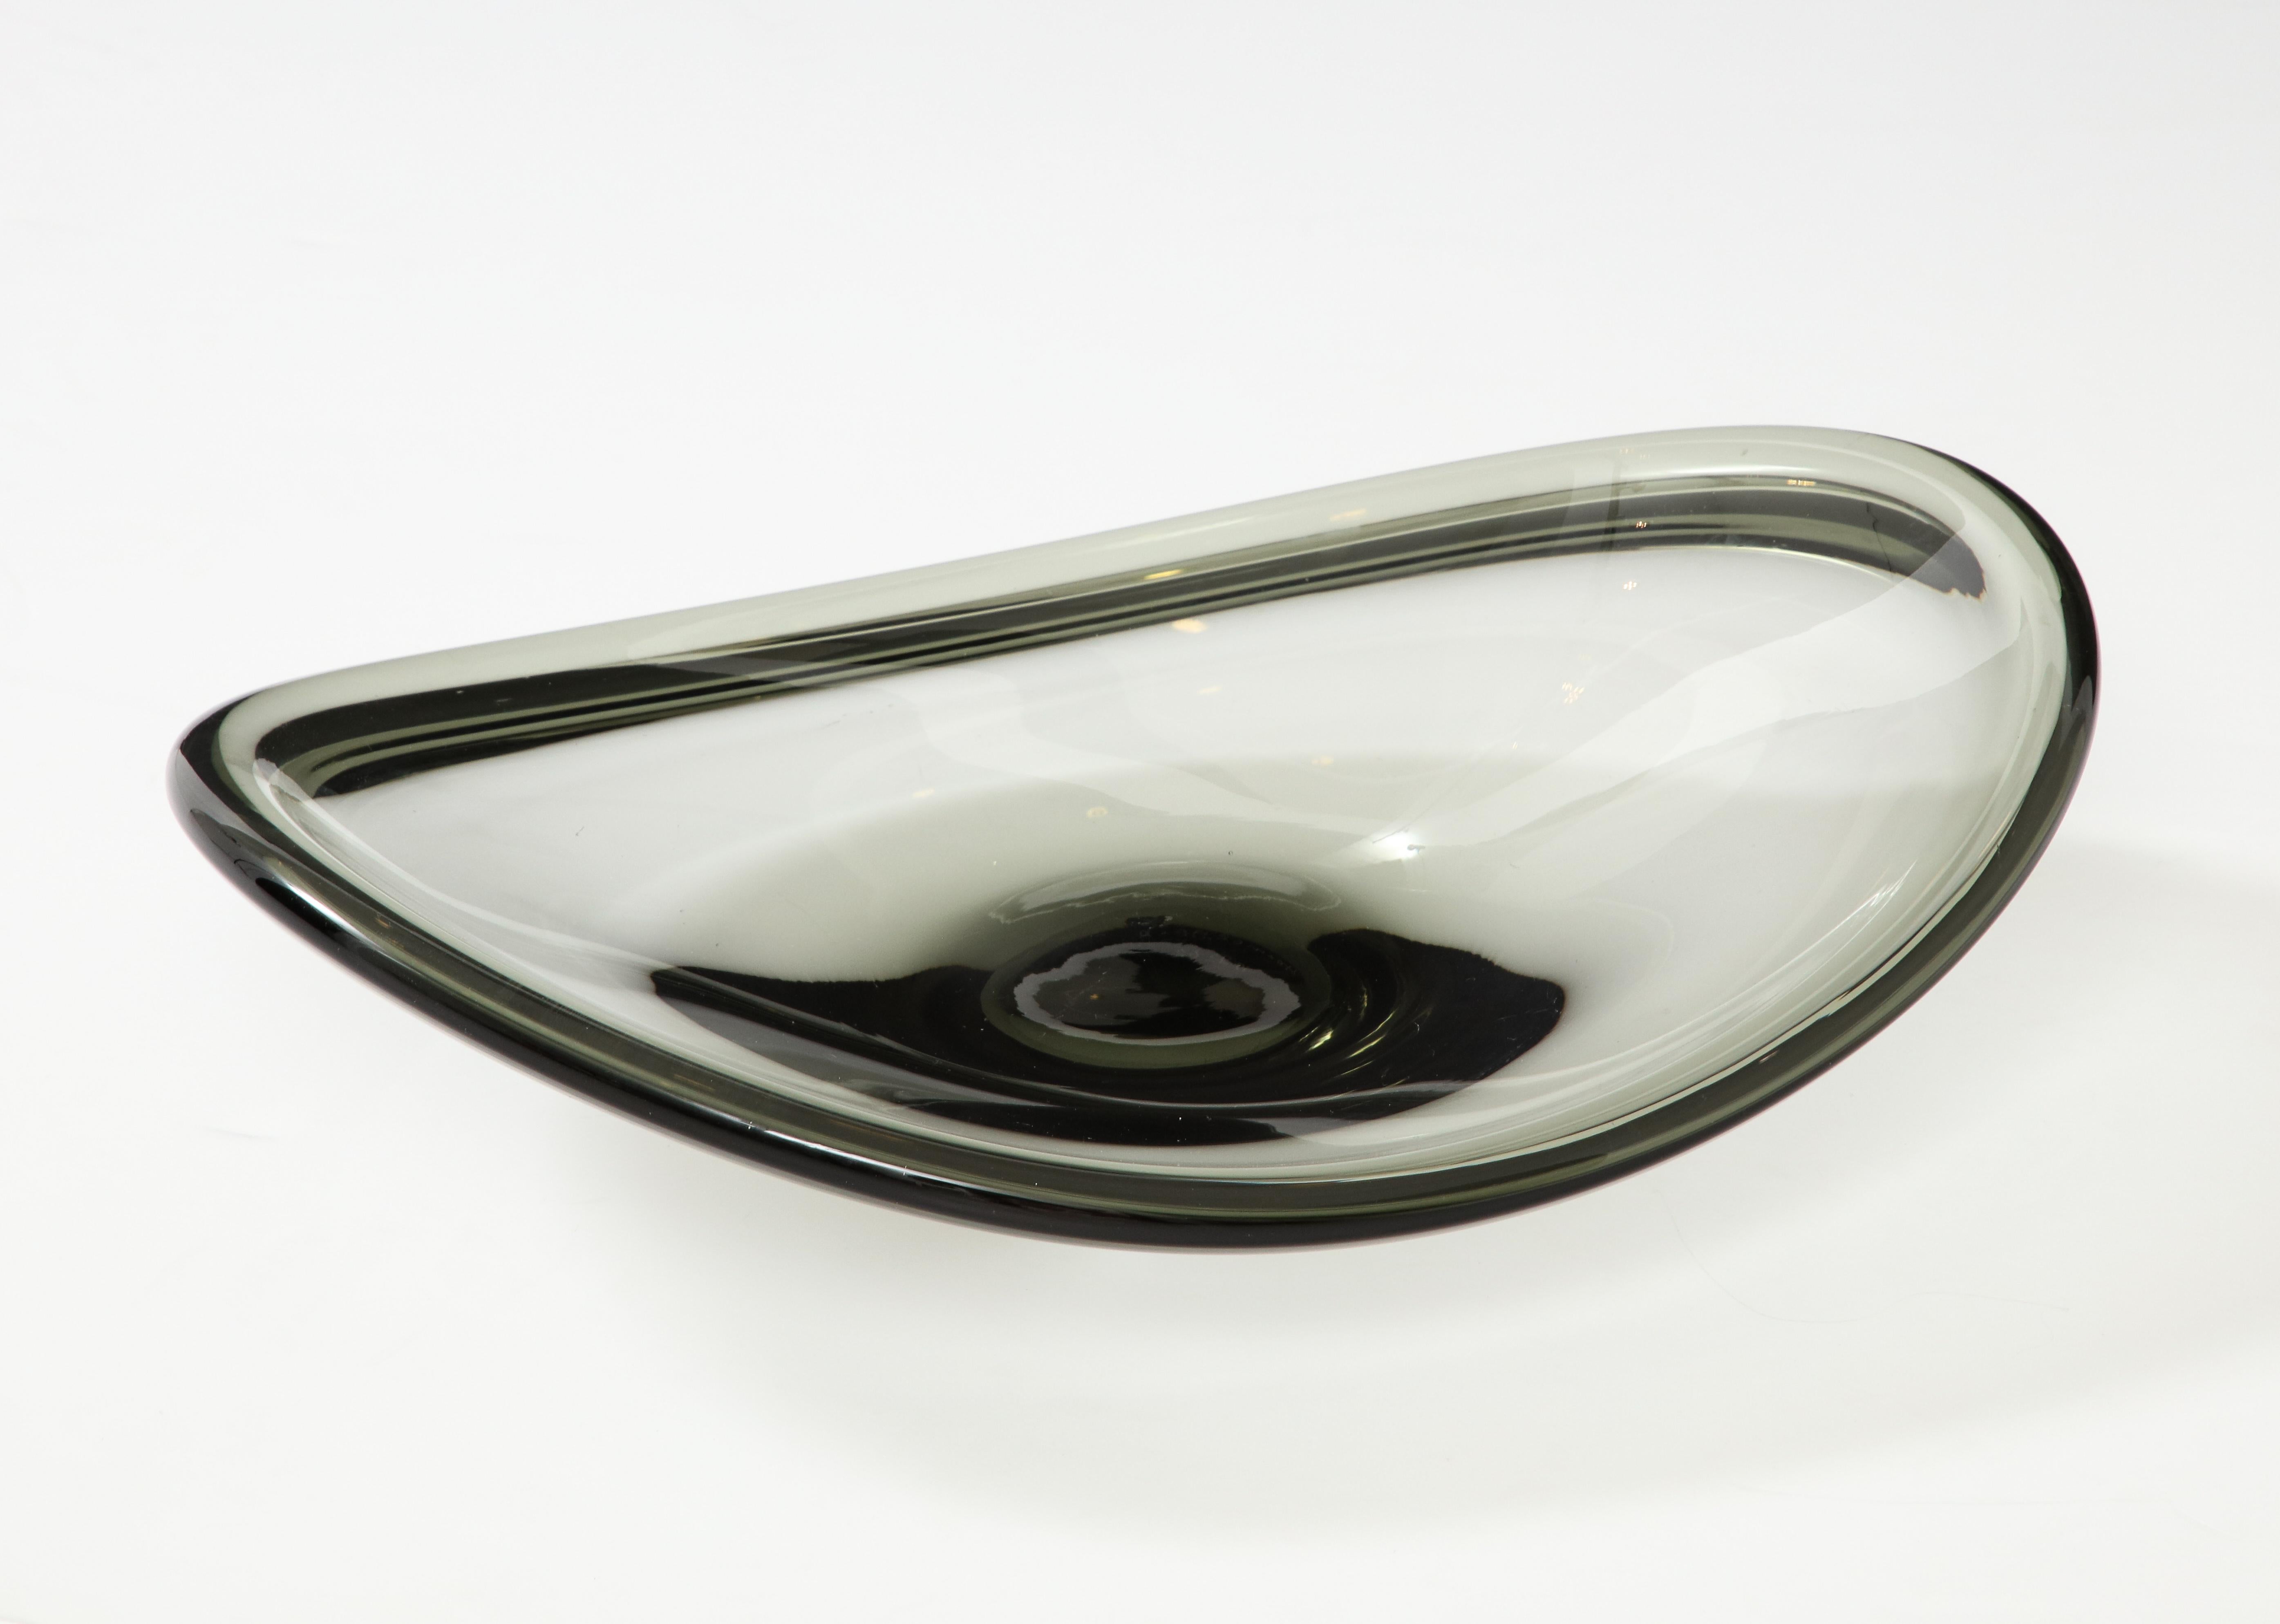 Large 1962 decorative glass bowl designed by Per Lutken for Holmegaard, in vintage original condition with minor wear and patina due to age and use.